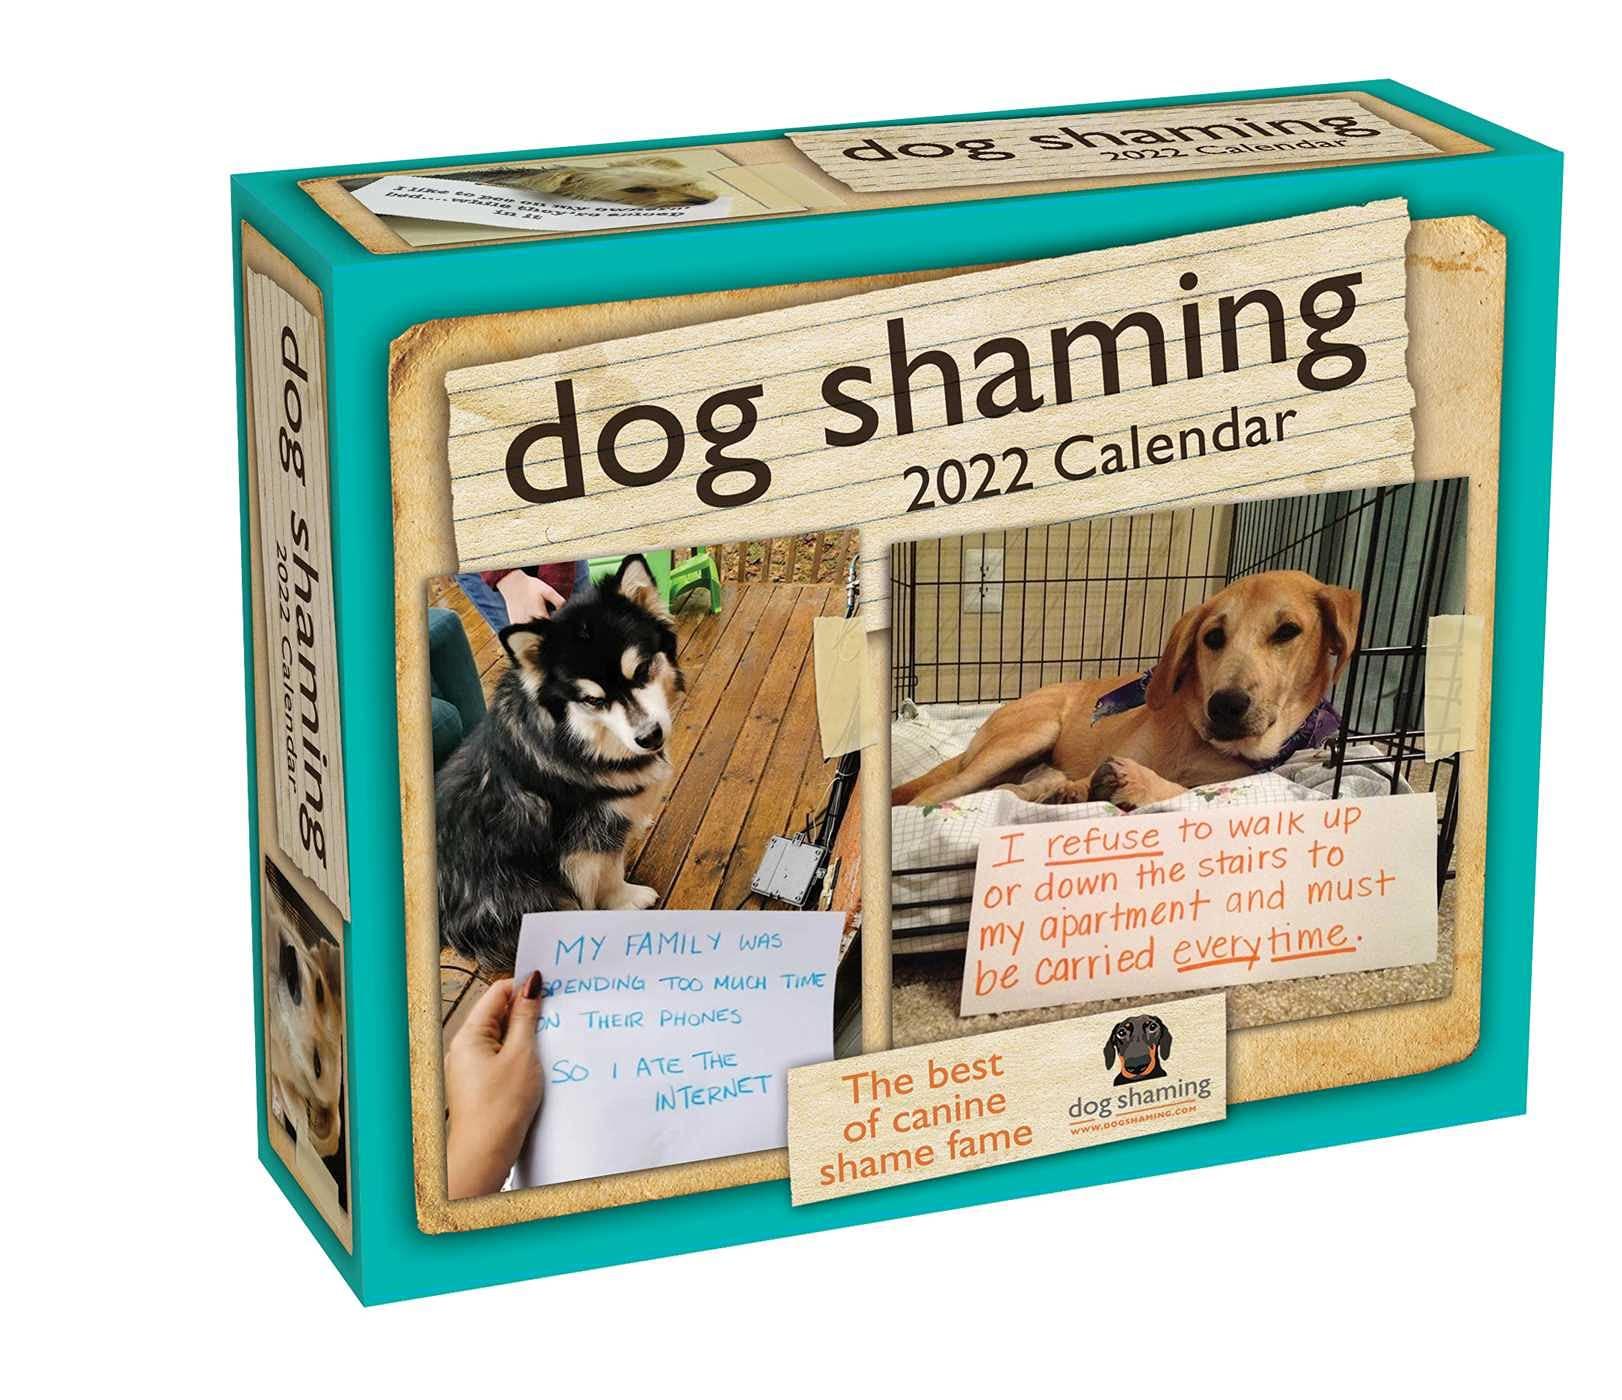 Dog Shaming 2022 Day-to-Day Calendar for $7.99